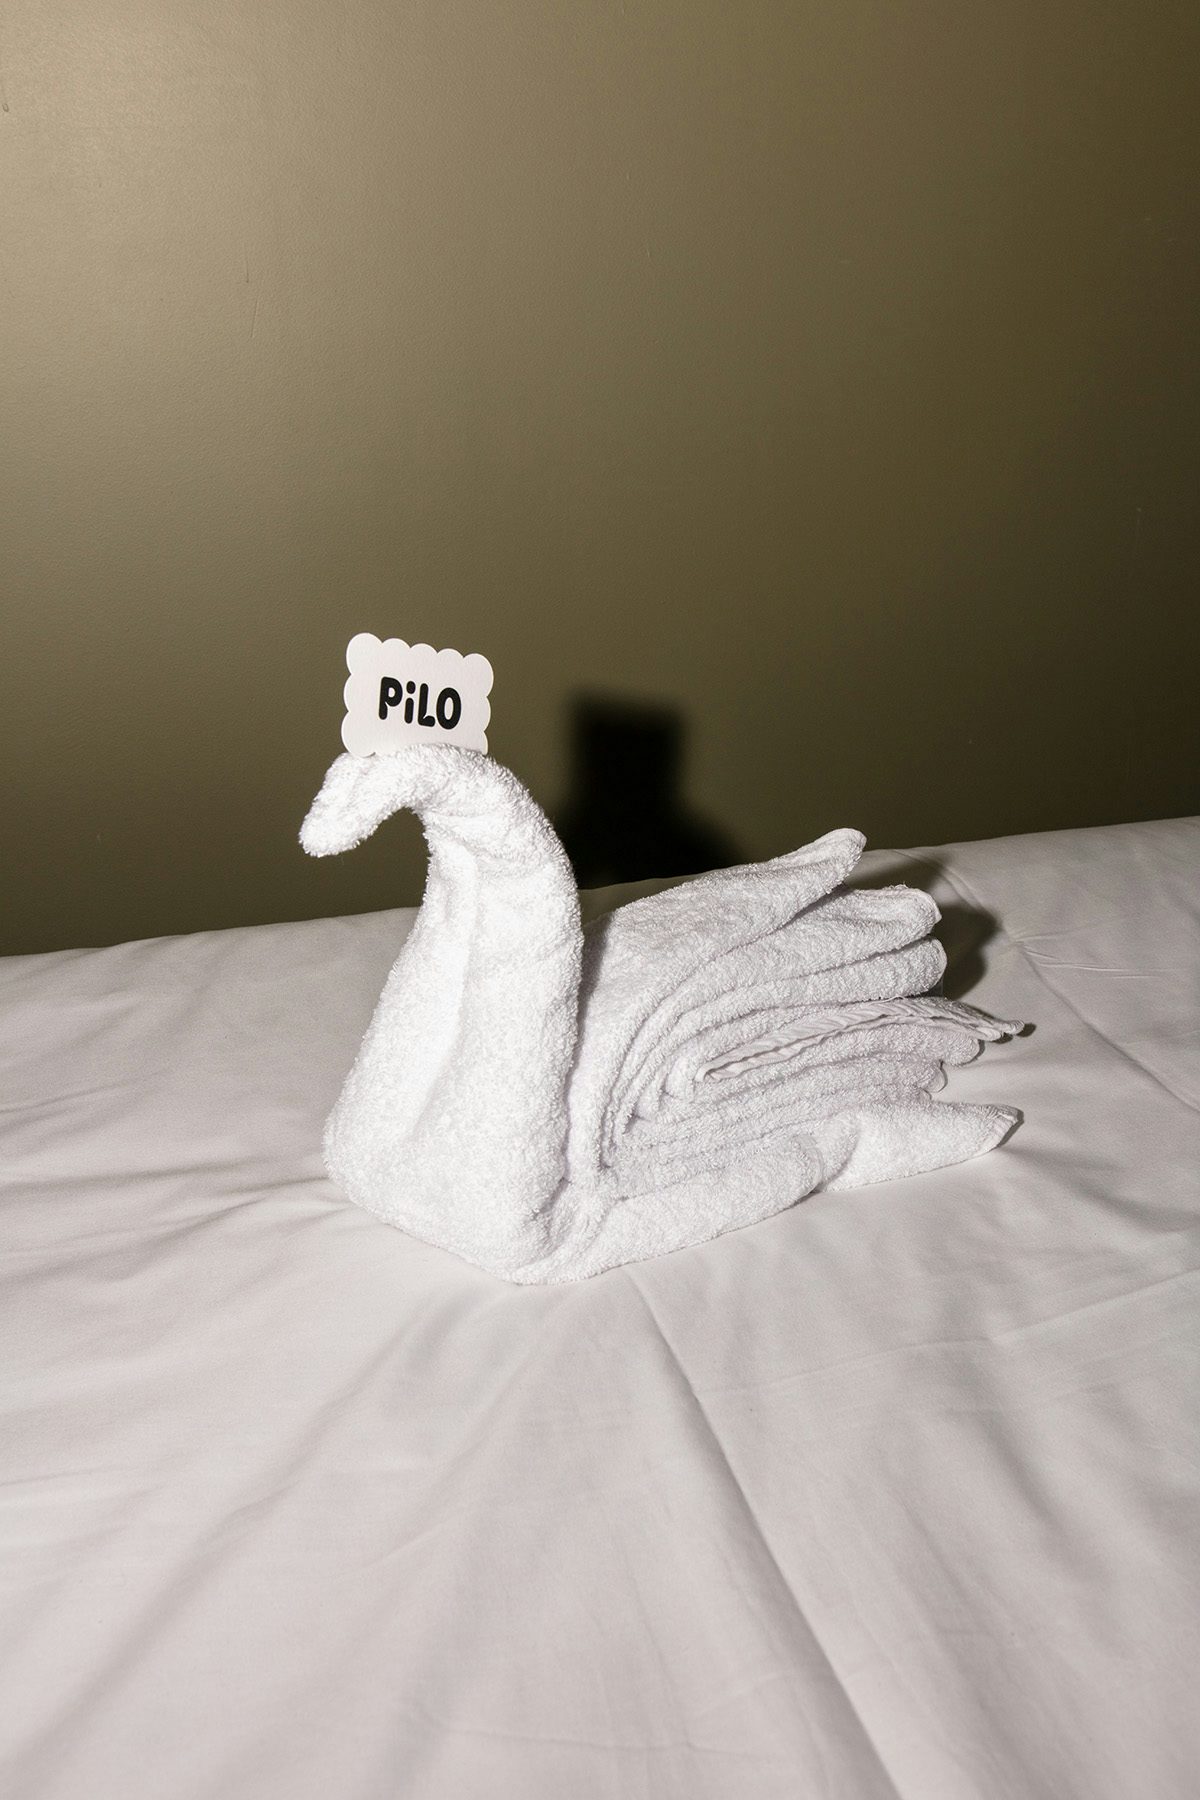 Photo of a towel arranged in the shape of a swan labelled Pilo